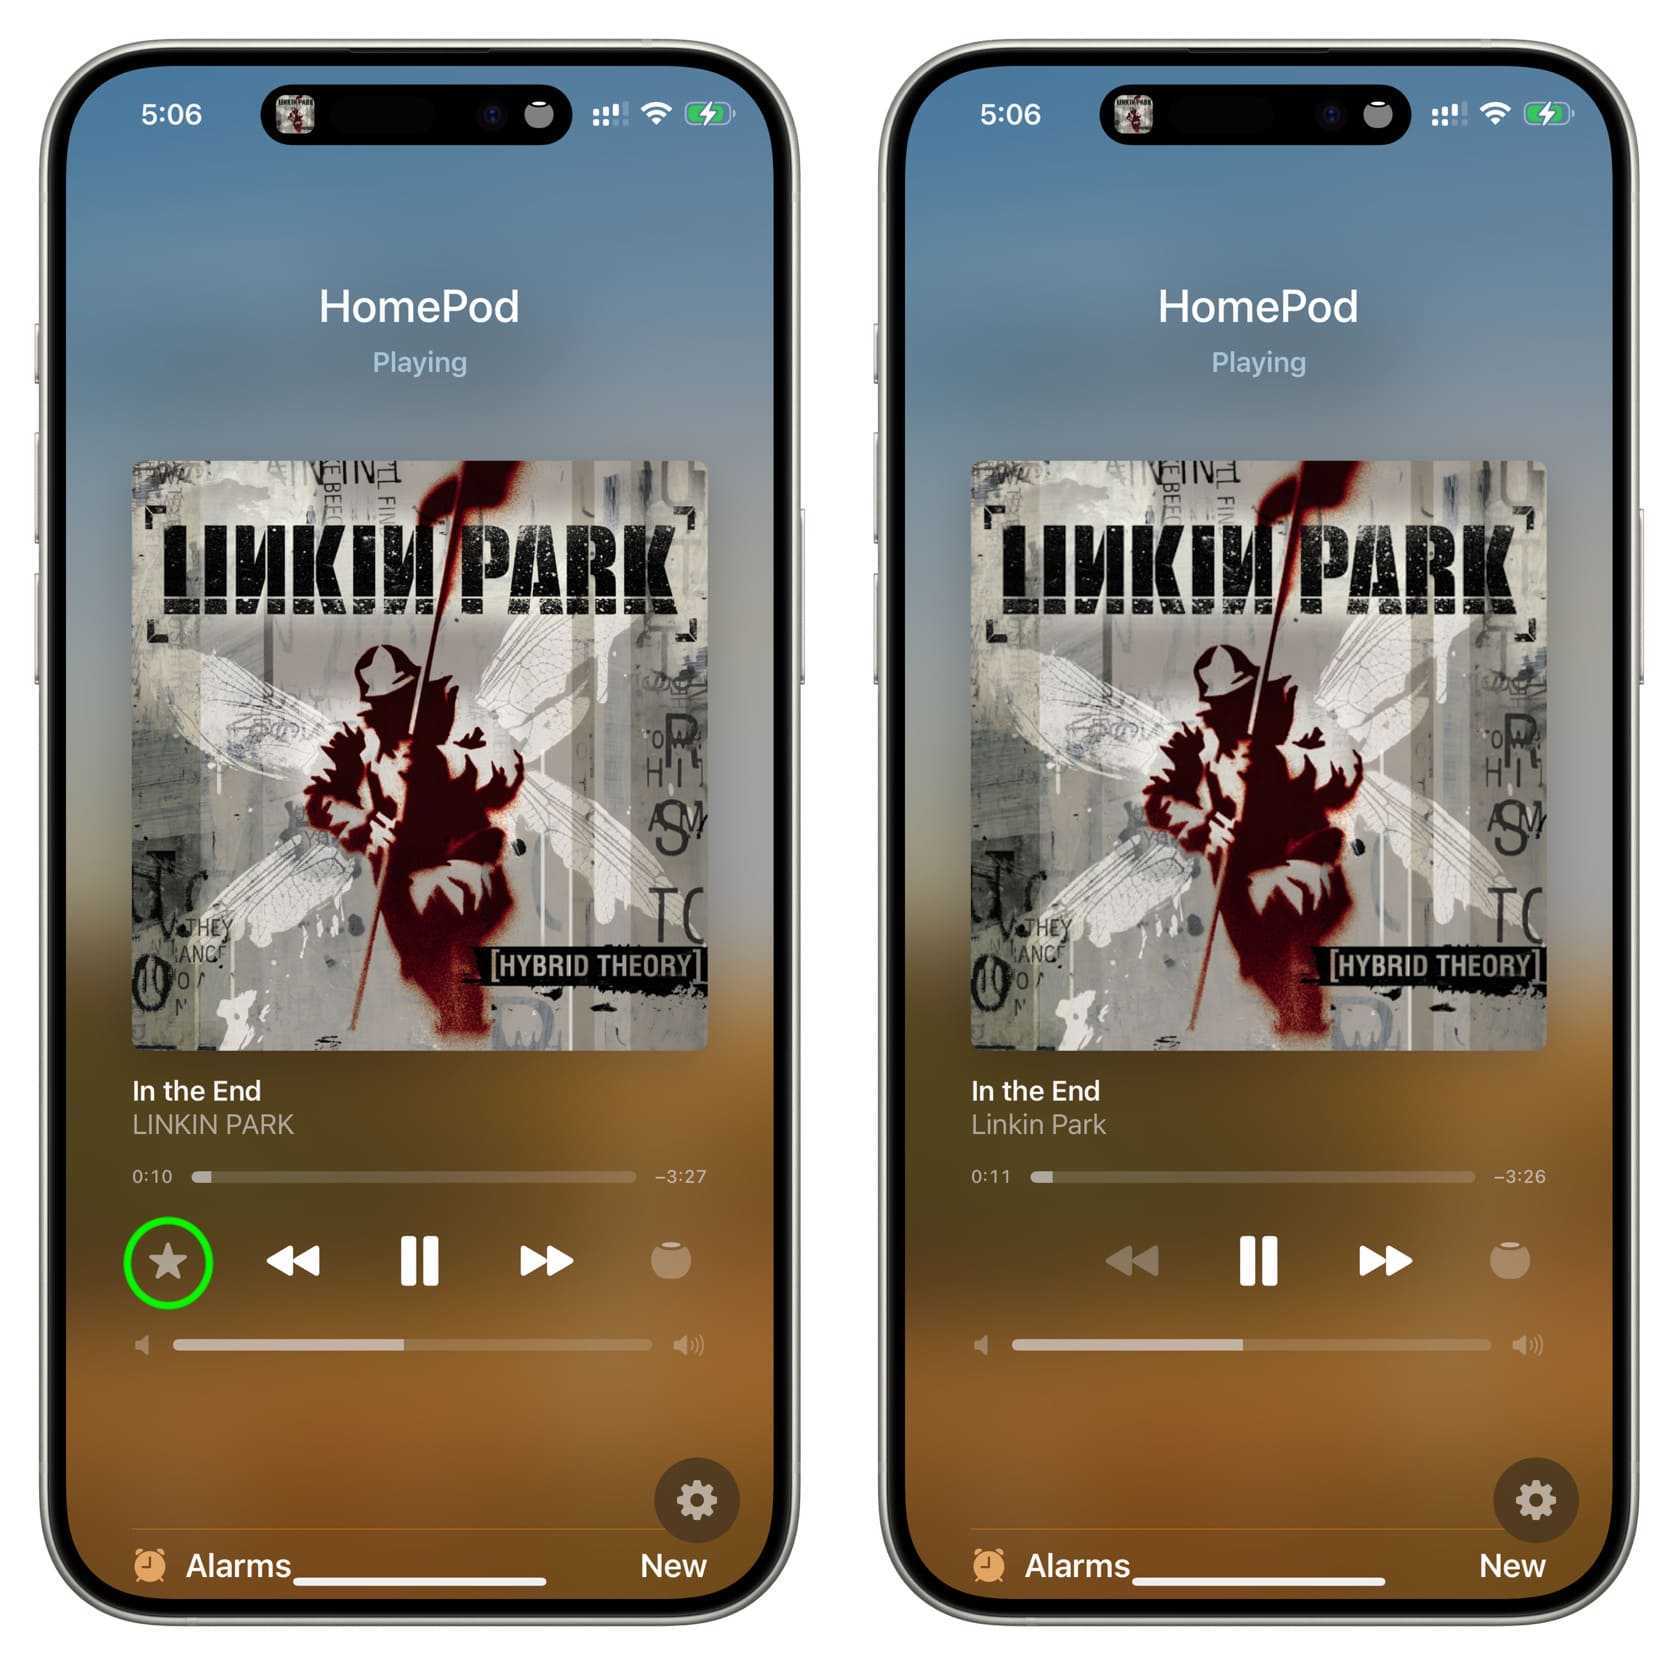 Now Playing screen in Home app when HomePod is playing from Apple Music and YouTube Music